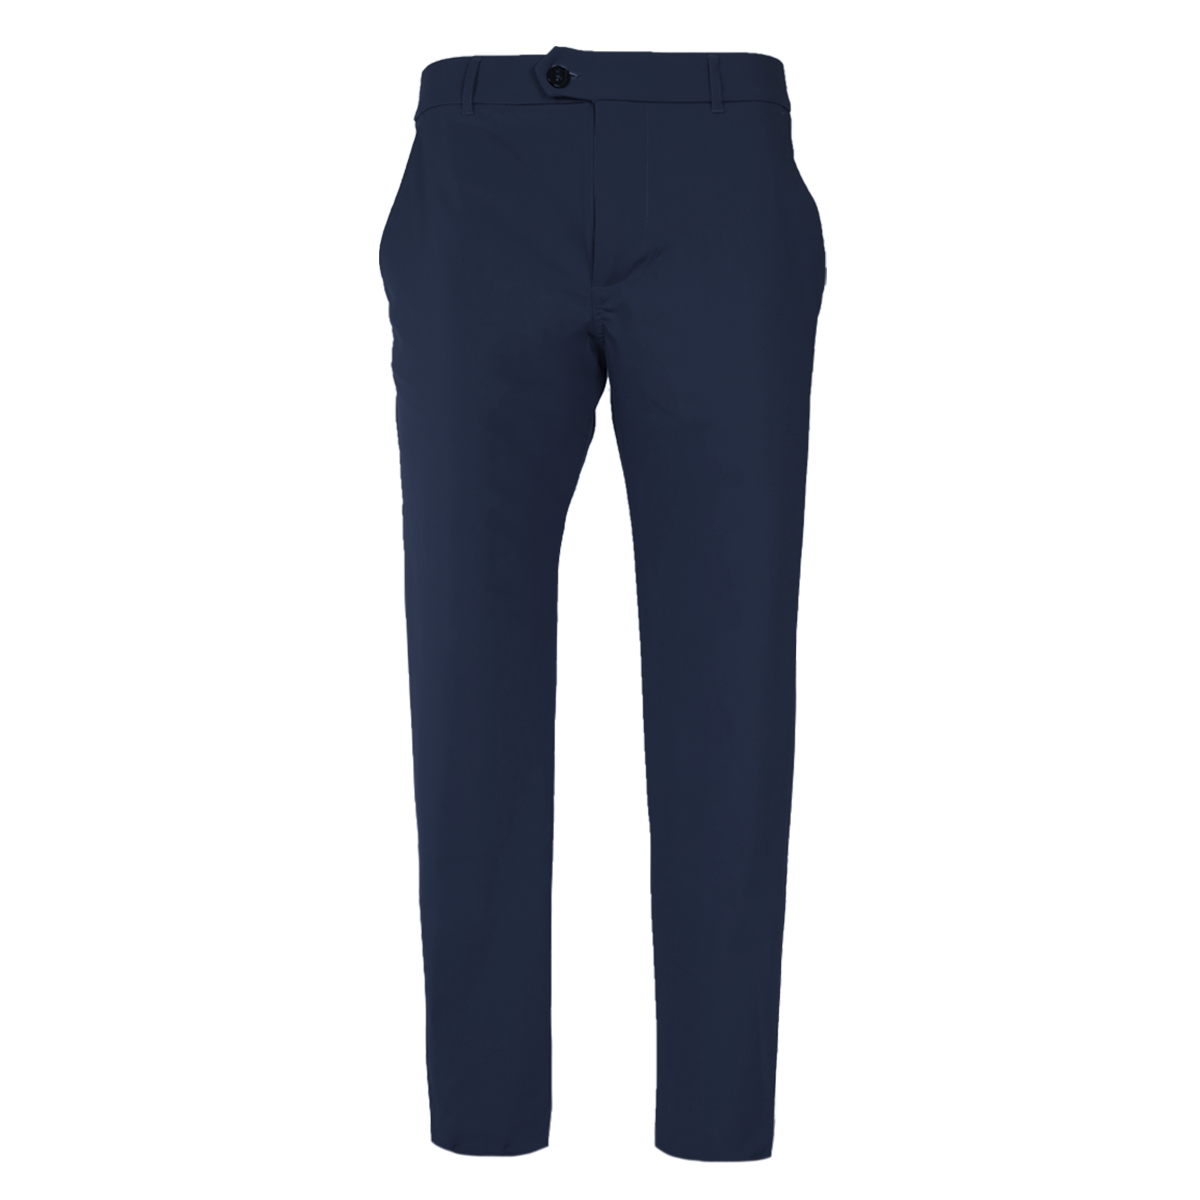 Greyson Montauk Trousers Now Available!